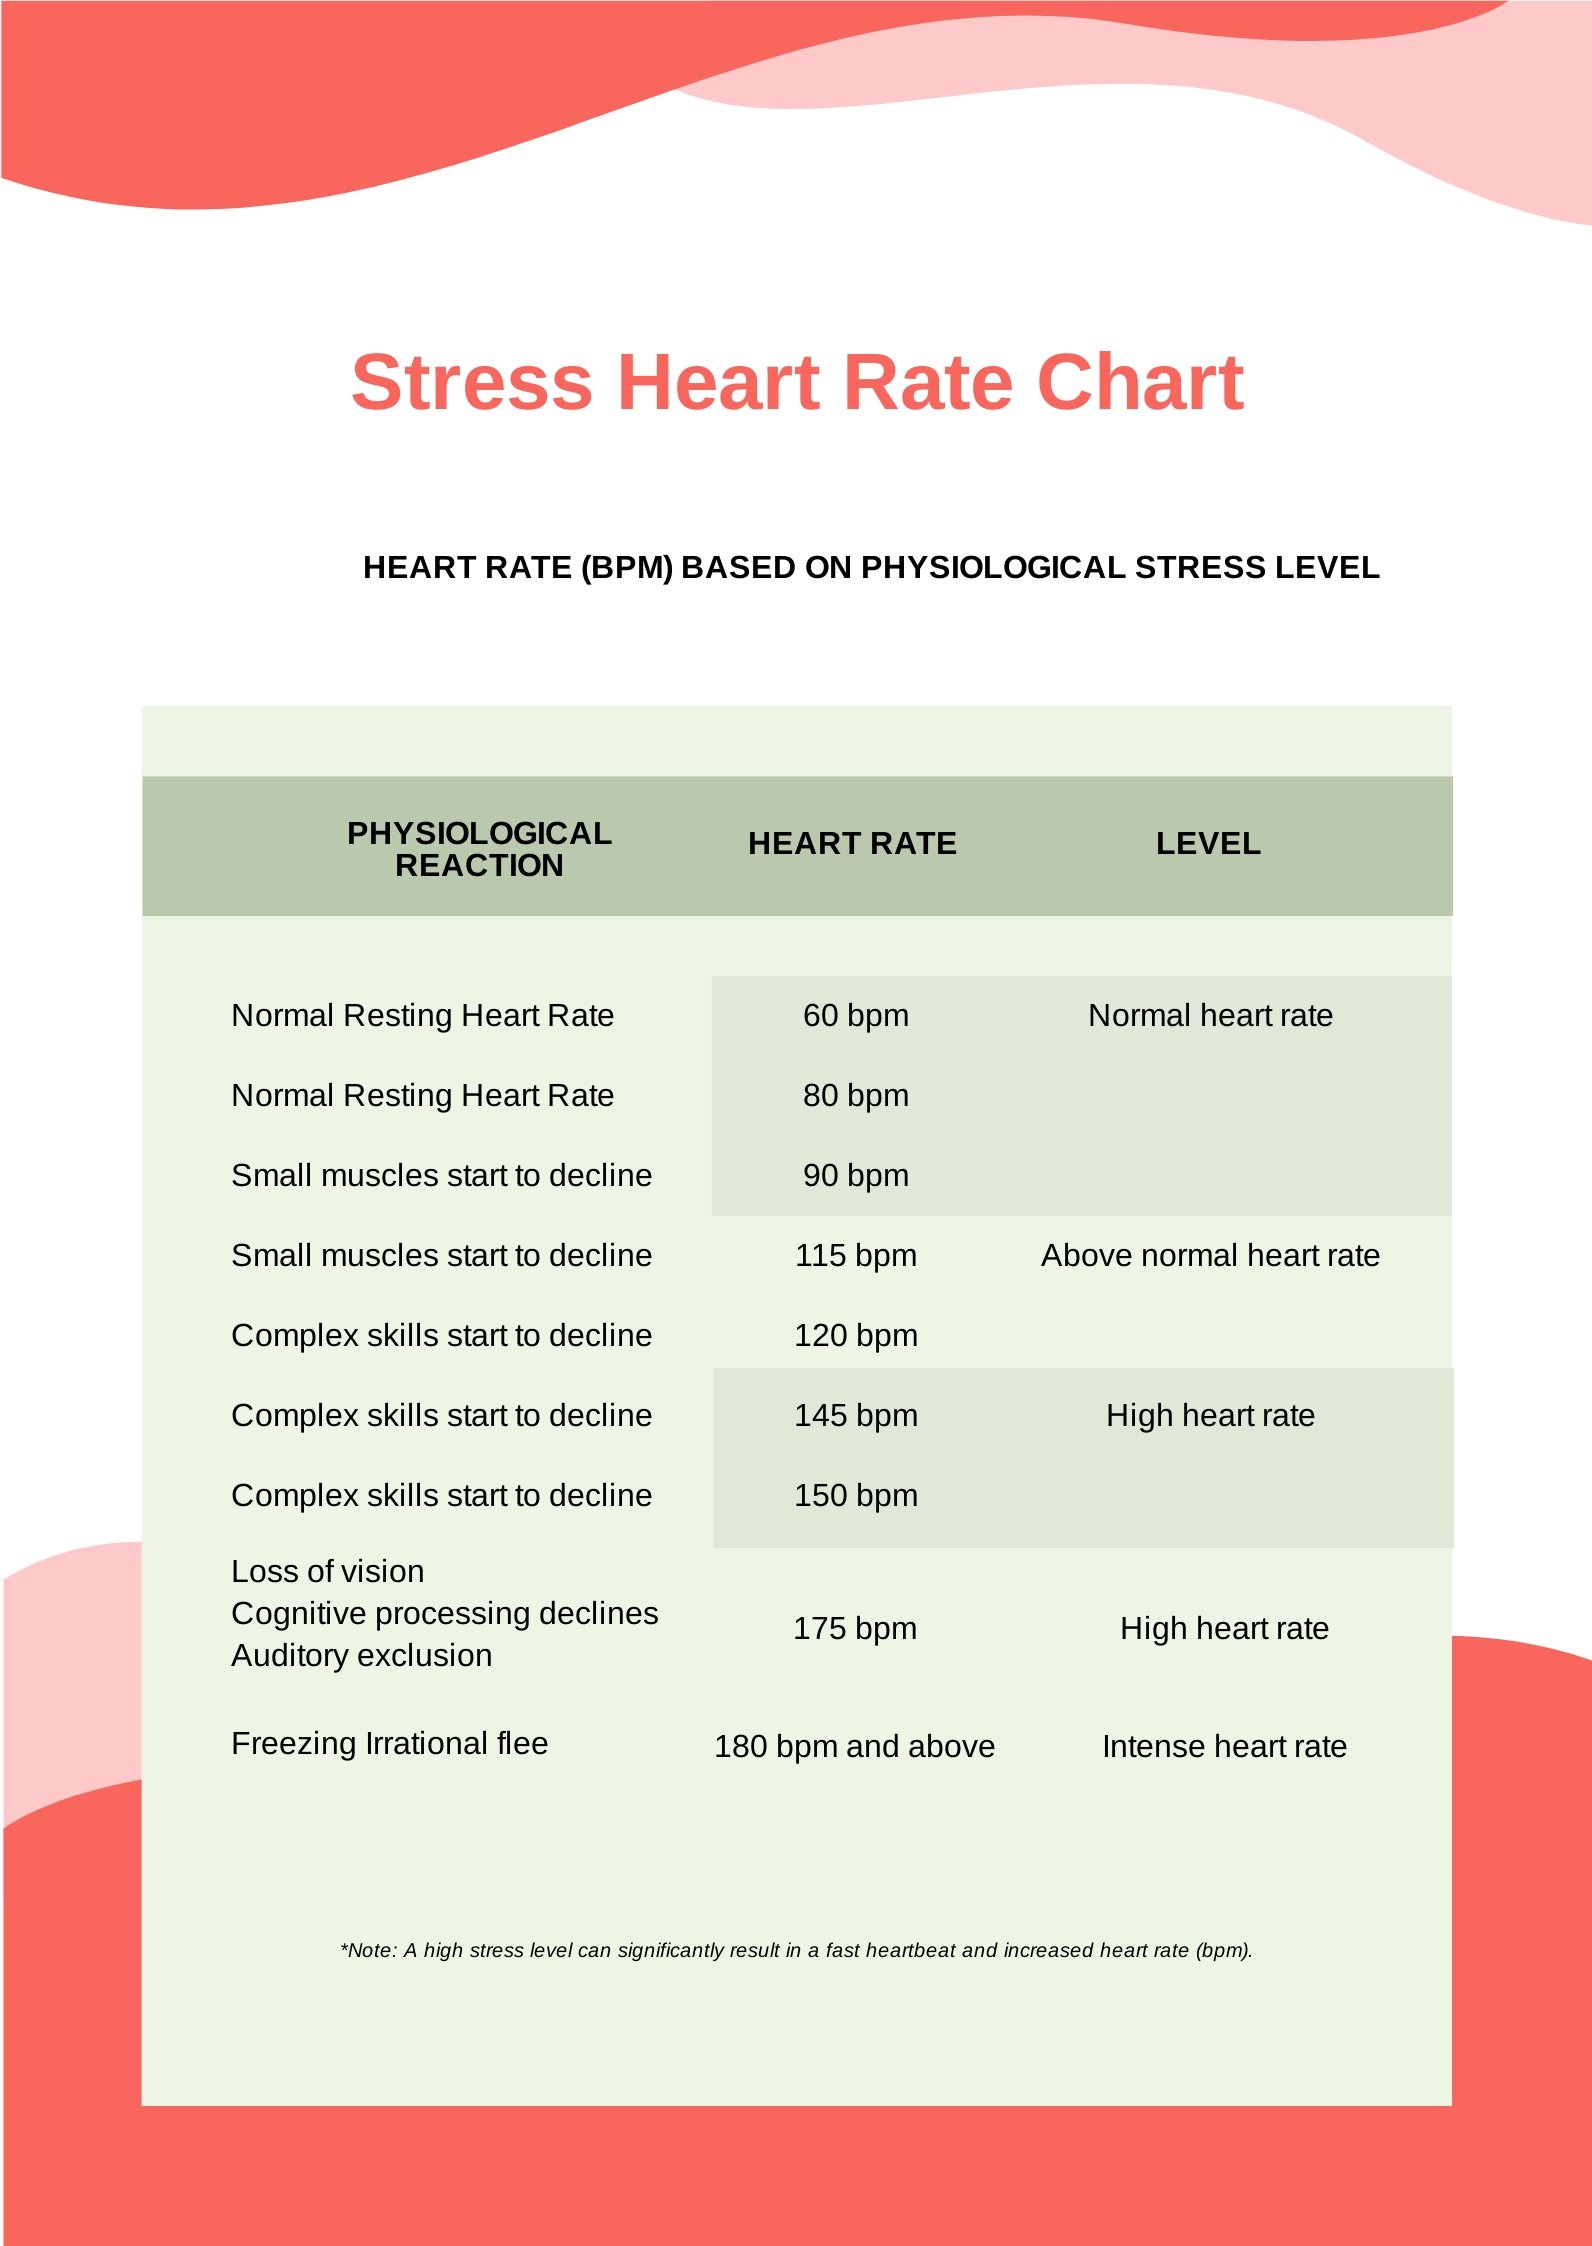 Stress Heart Rate Chart in PDF